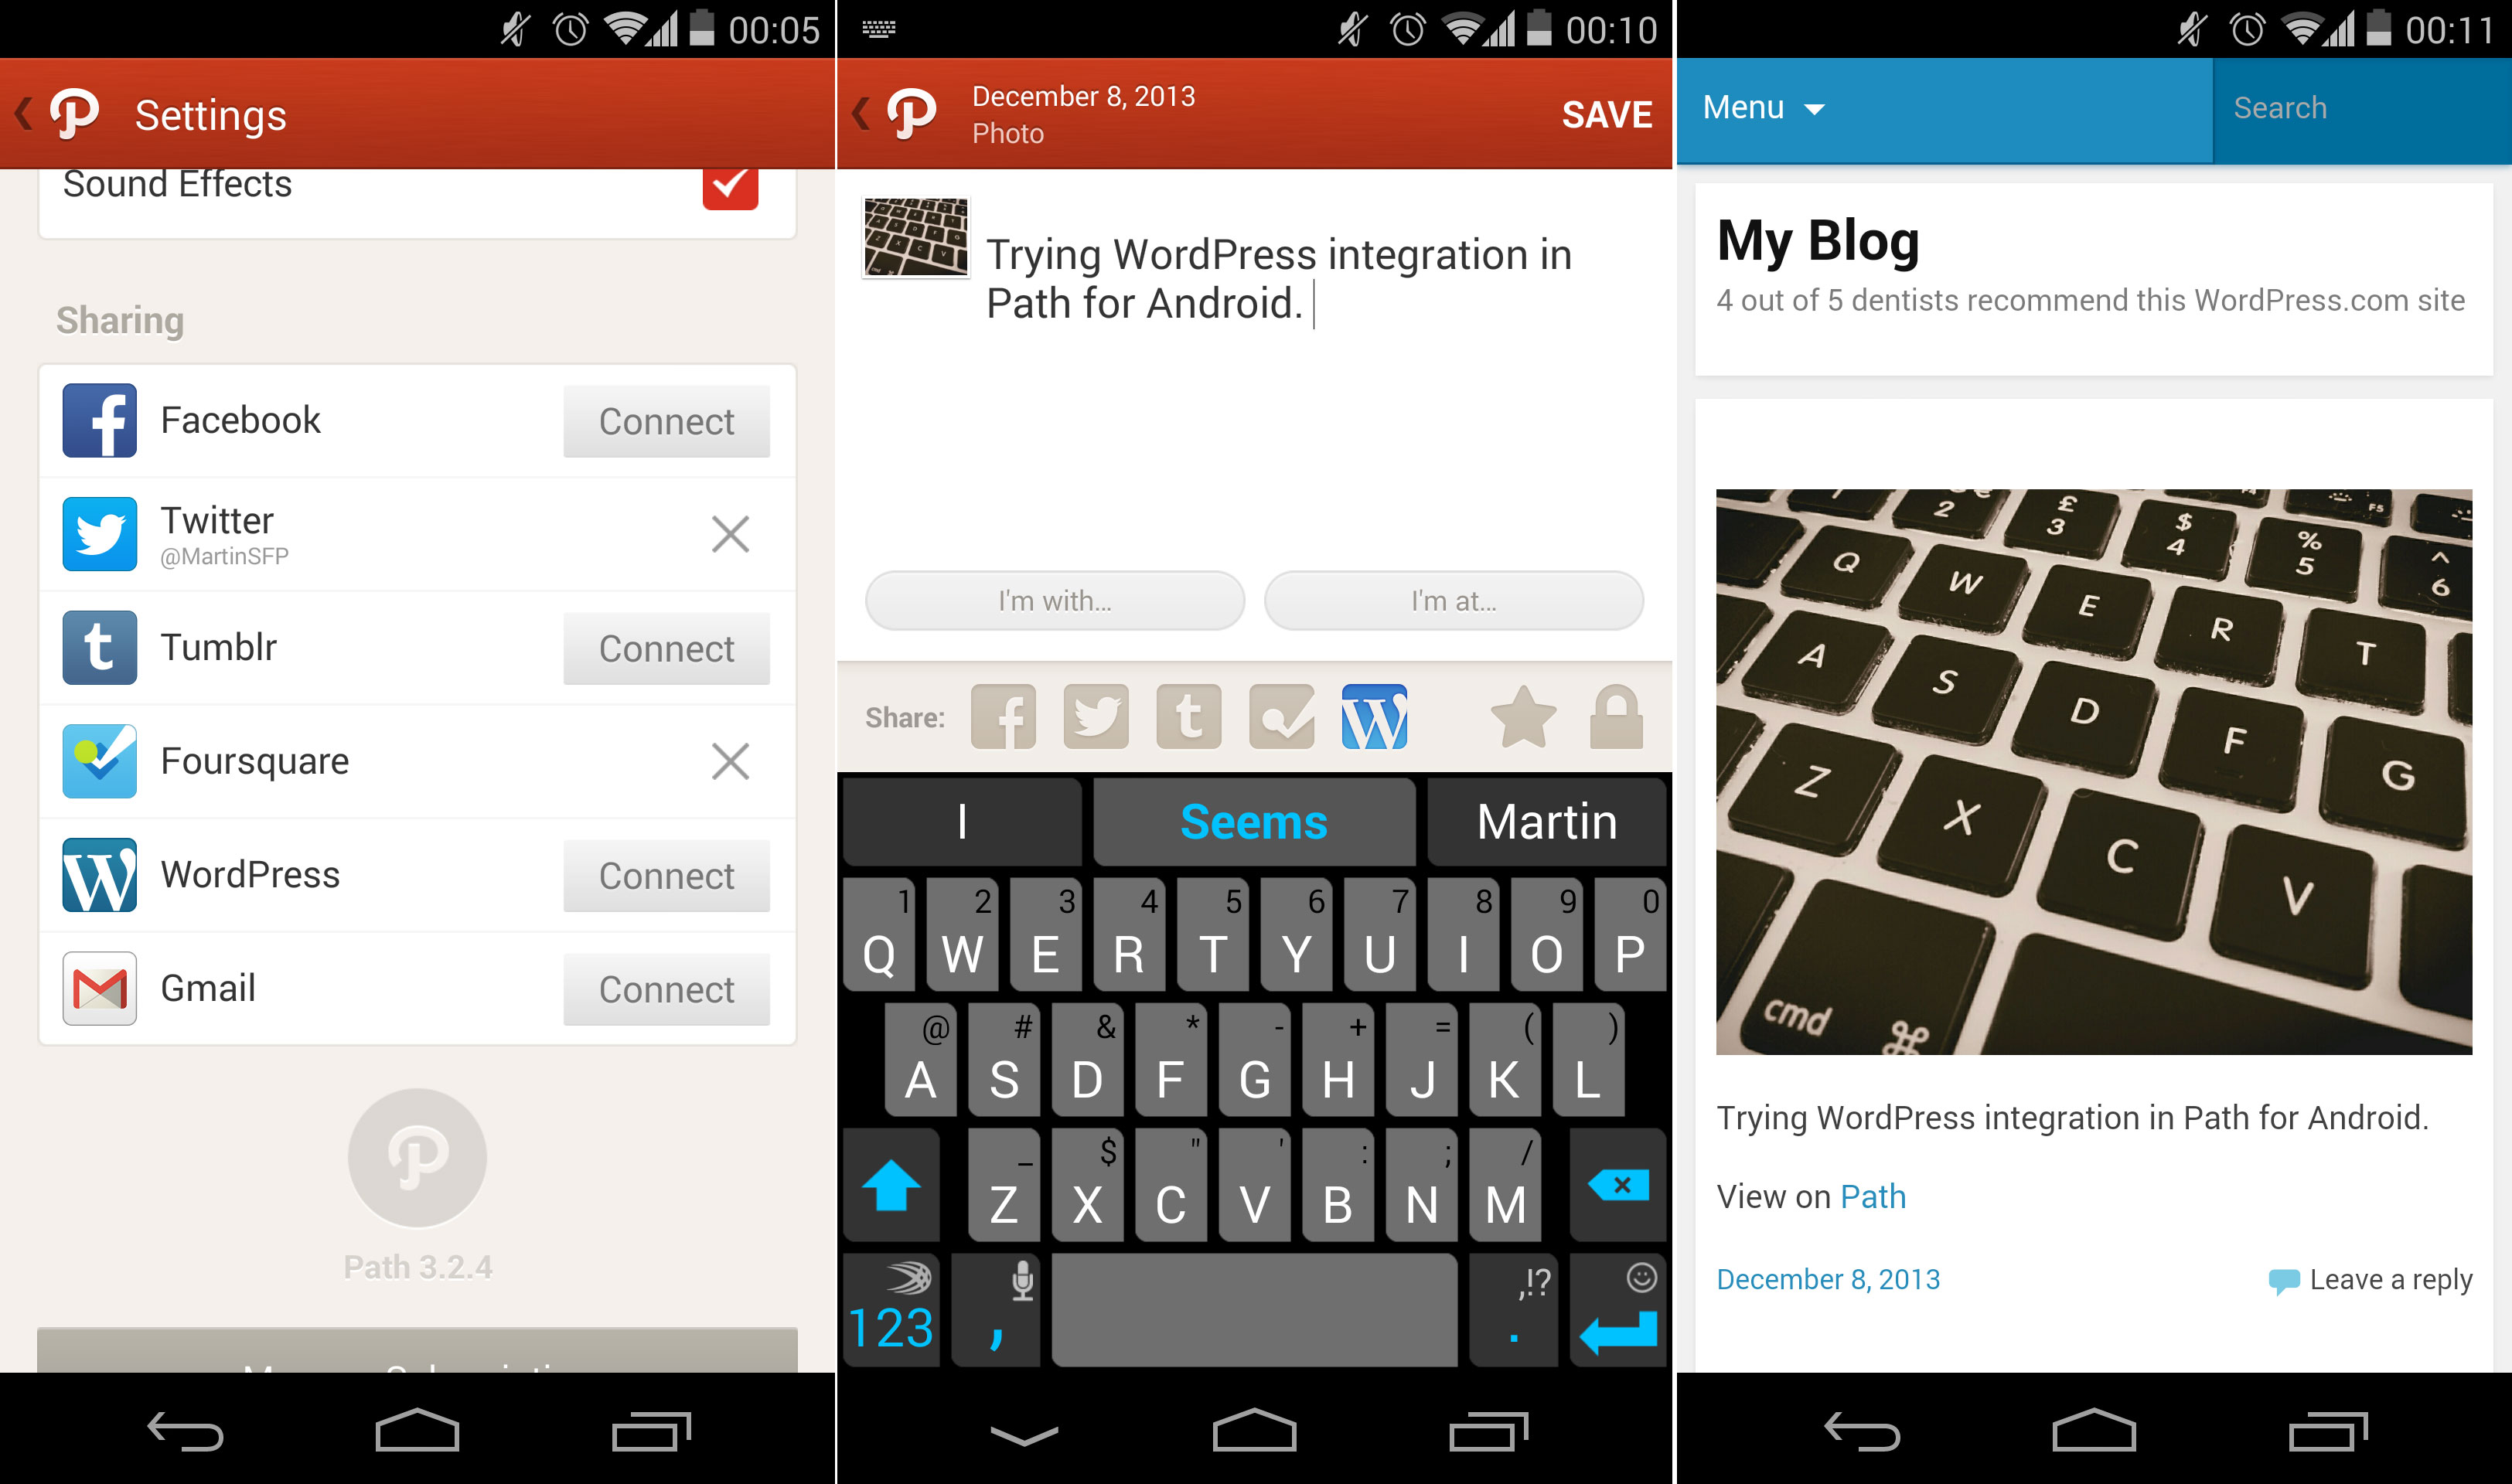 Path Adds Feature For Moments To Be Shared Directly To WordPress Blogs